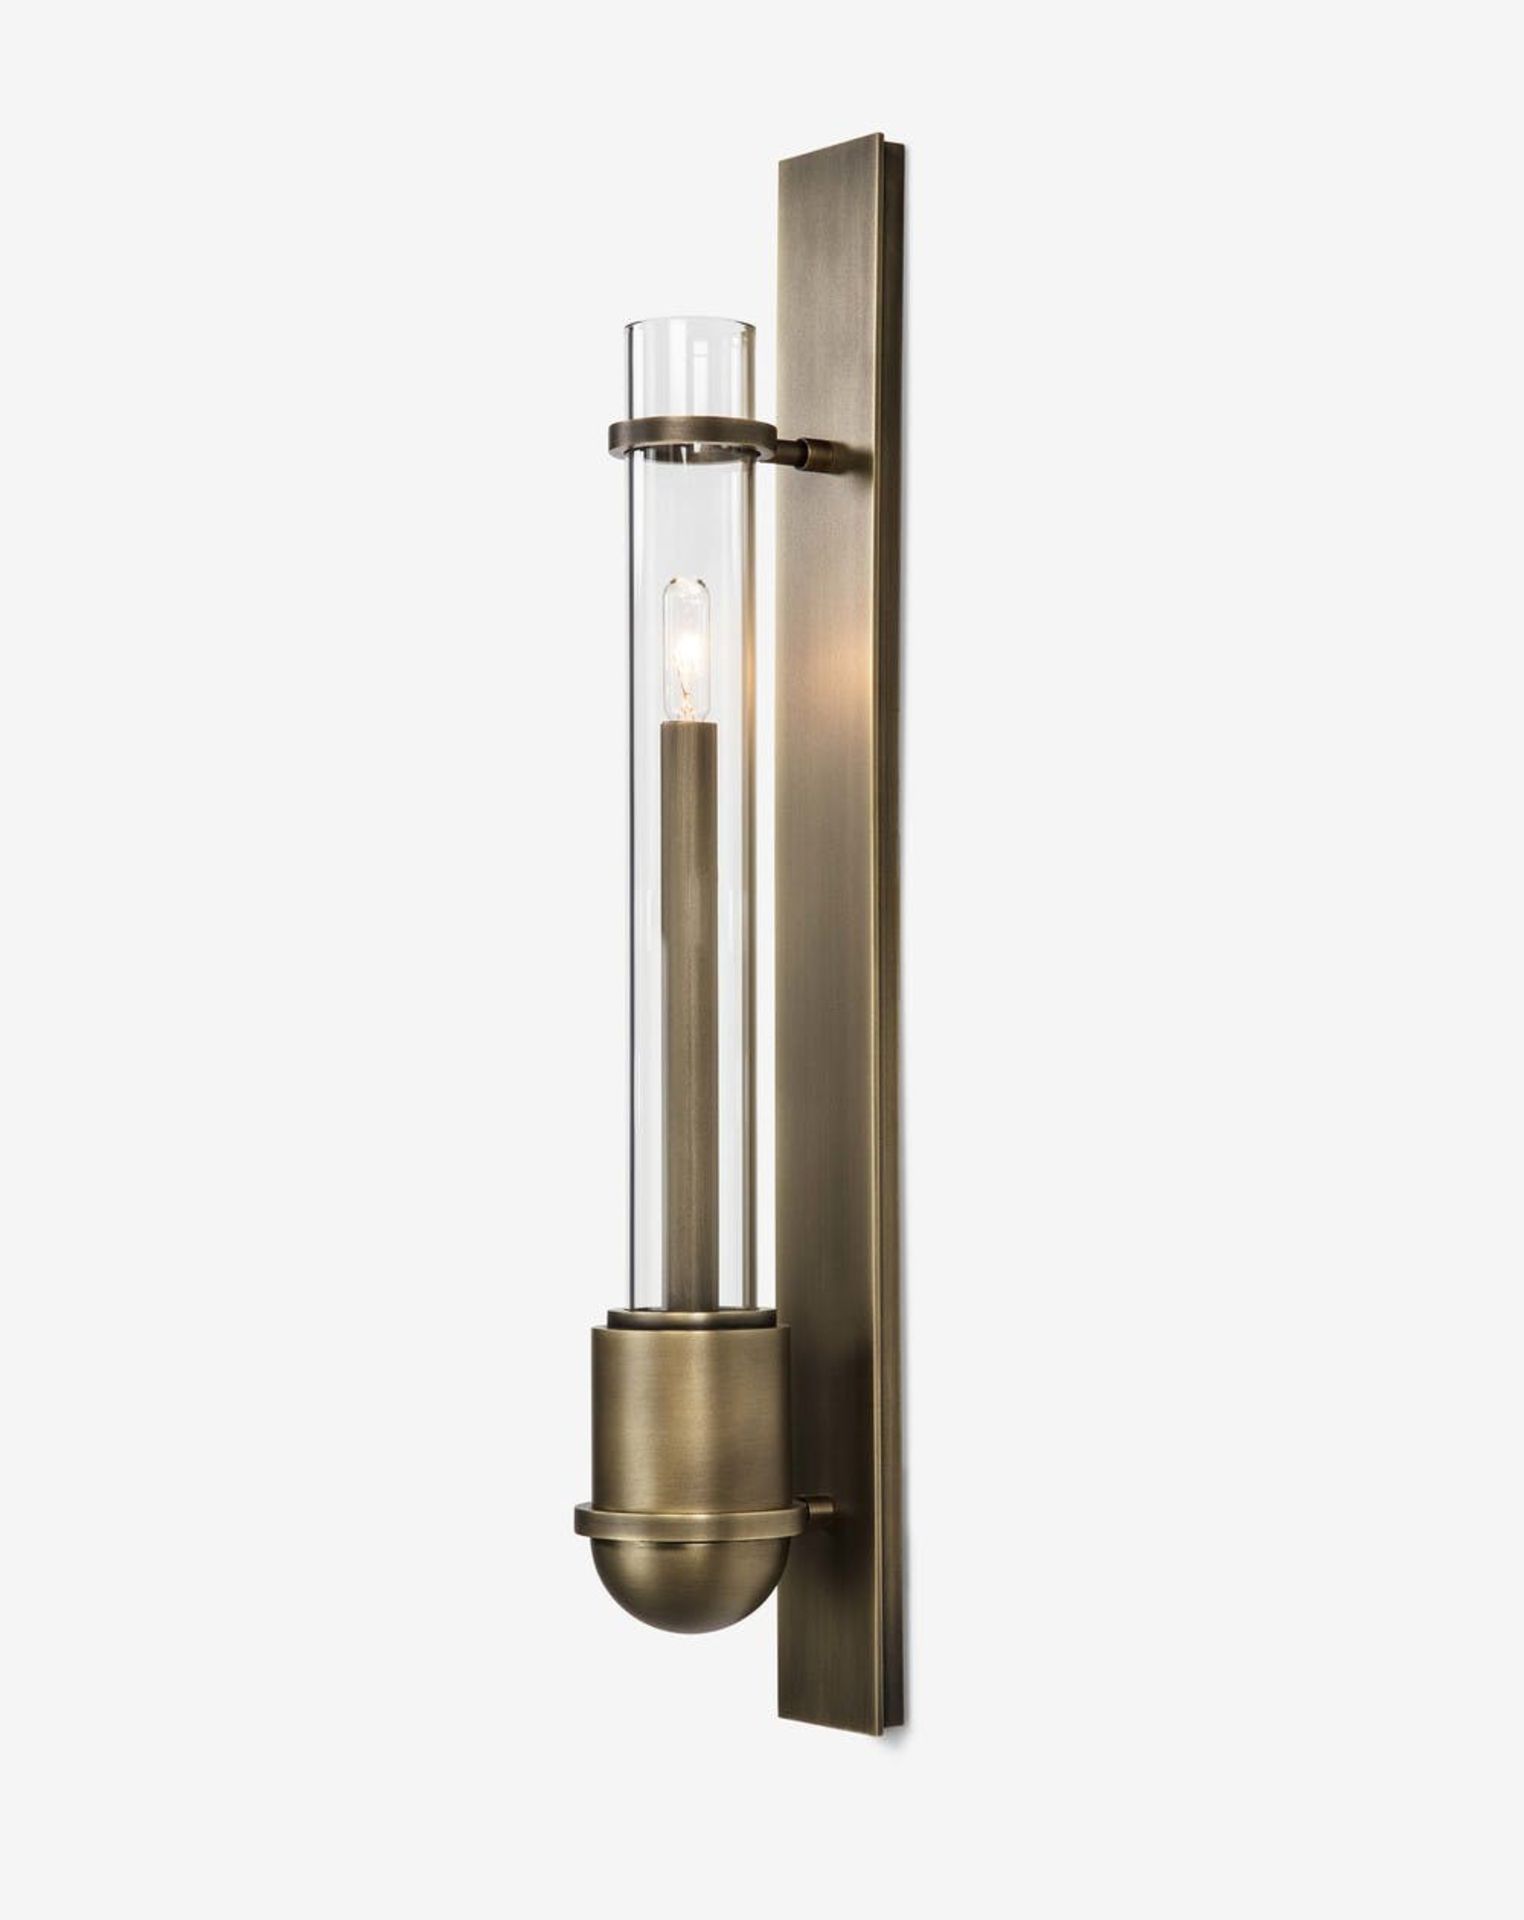 The Urban Electric Co HUNTLEY TH-1211WR WALL LIGHT From bedrooms to bathrooms, entryways,